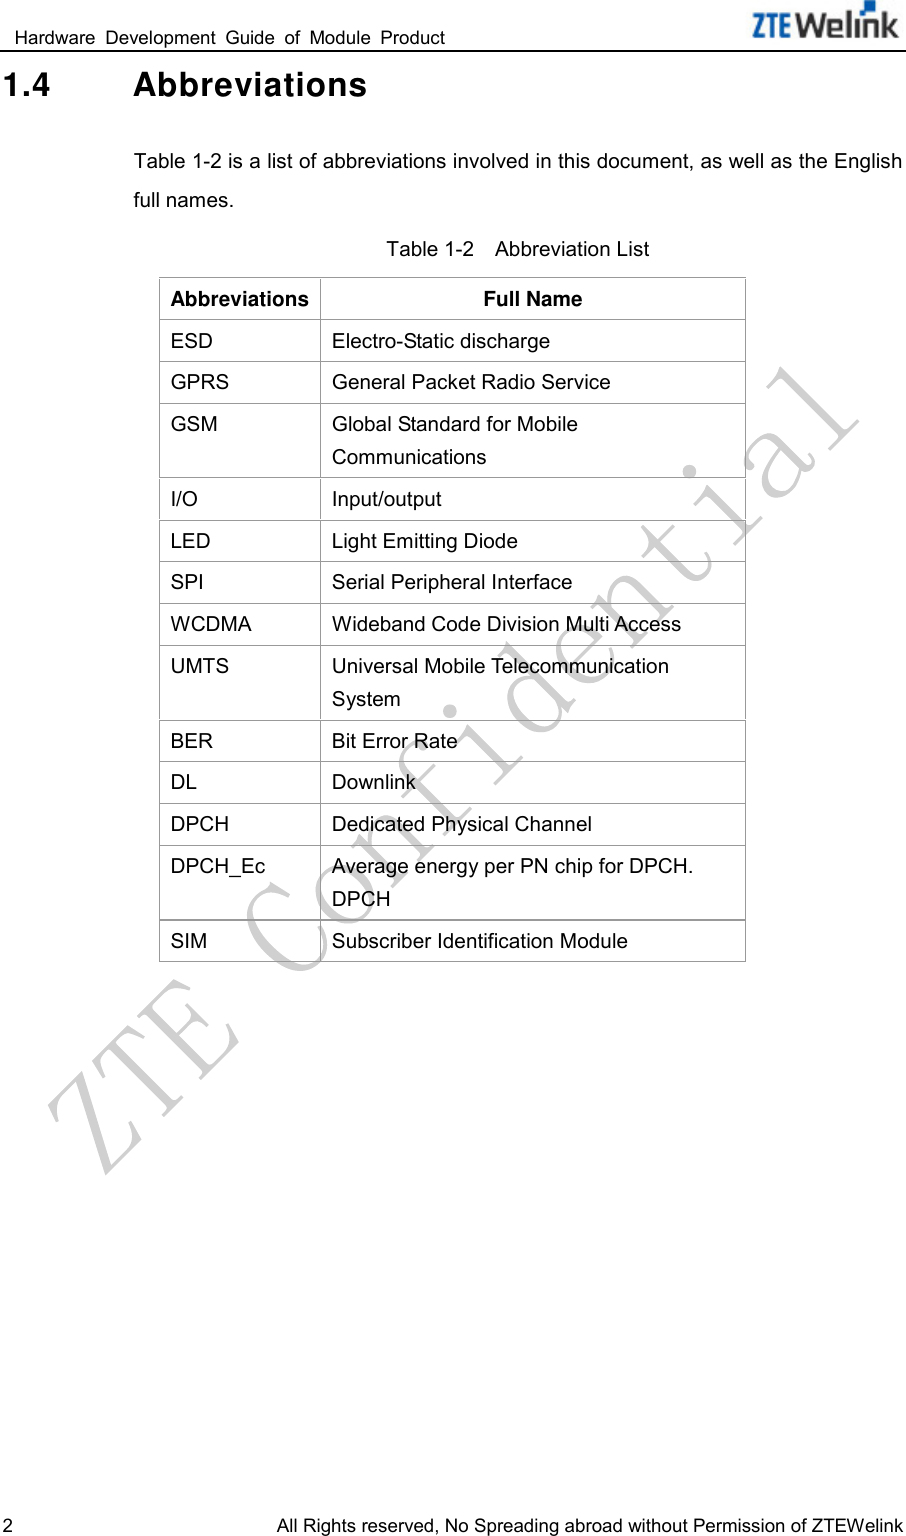  Hardware  Development  Guide  of  Module  Product                                                               2  All Rights reserved, No Spreading abroad without Permission of ZTEWelink 1.4 Abbreviations Table 1-2 is a list of abbreviations involved in this document, as well as the English full names.   Table 1-2    Abbreviation List Abbreviations Full Name ESD Electro-Static discharge GPRS General Packet Radio Service GSM Global Standard for Mobile Communications I/O Input/output LED Light Emitting Diode SPI  Serial Peripheral Interface WCDMA Wideband Code Division Multi Access UMTS Universal Mobile Telecommunication System BER Bit Error Rate DL   Downlink DPCH   Dedicated Physical Channel DPCH_Ec Average energy per PN chip for DPCH. DPCH SIM Subscriber Identification Module 